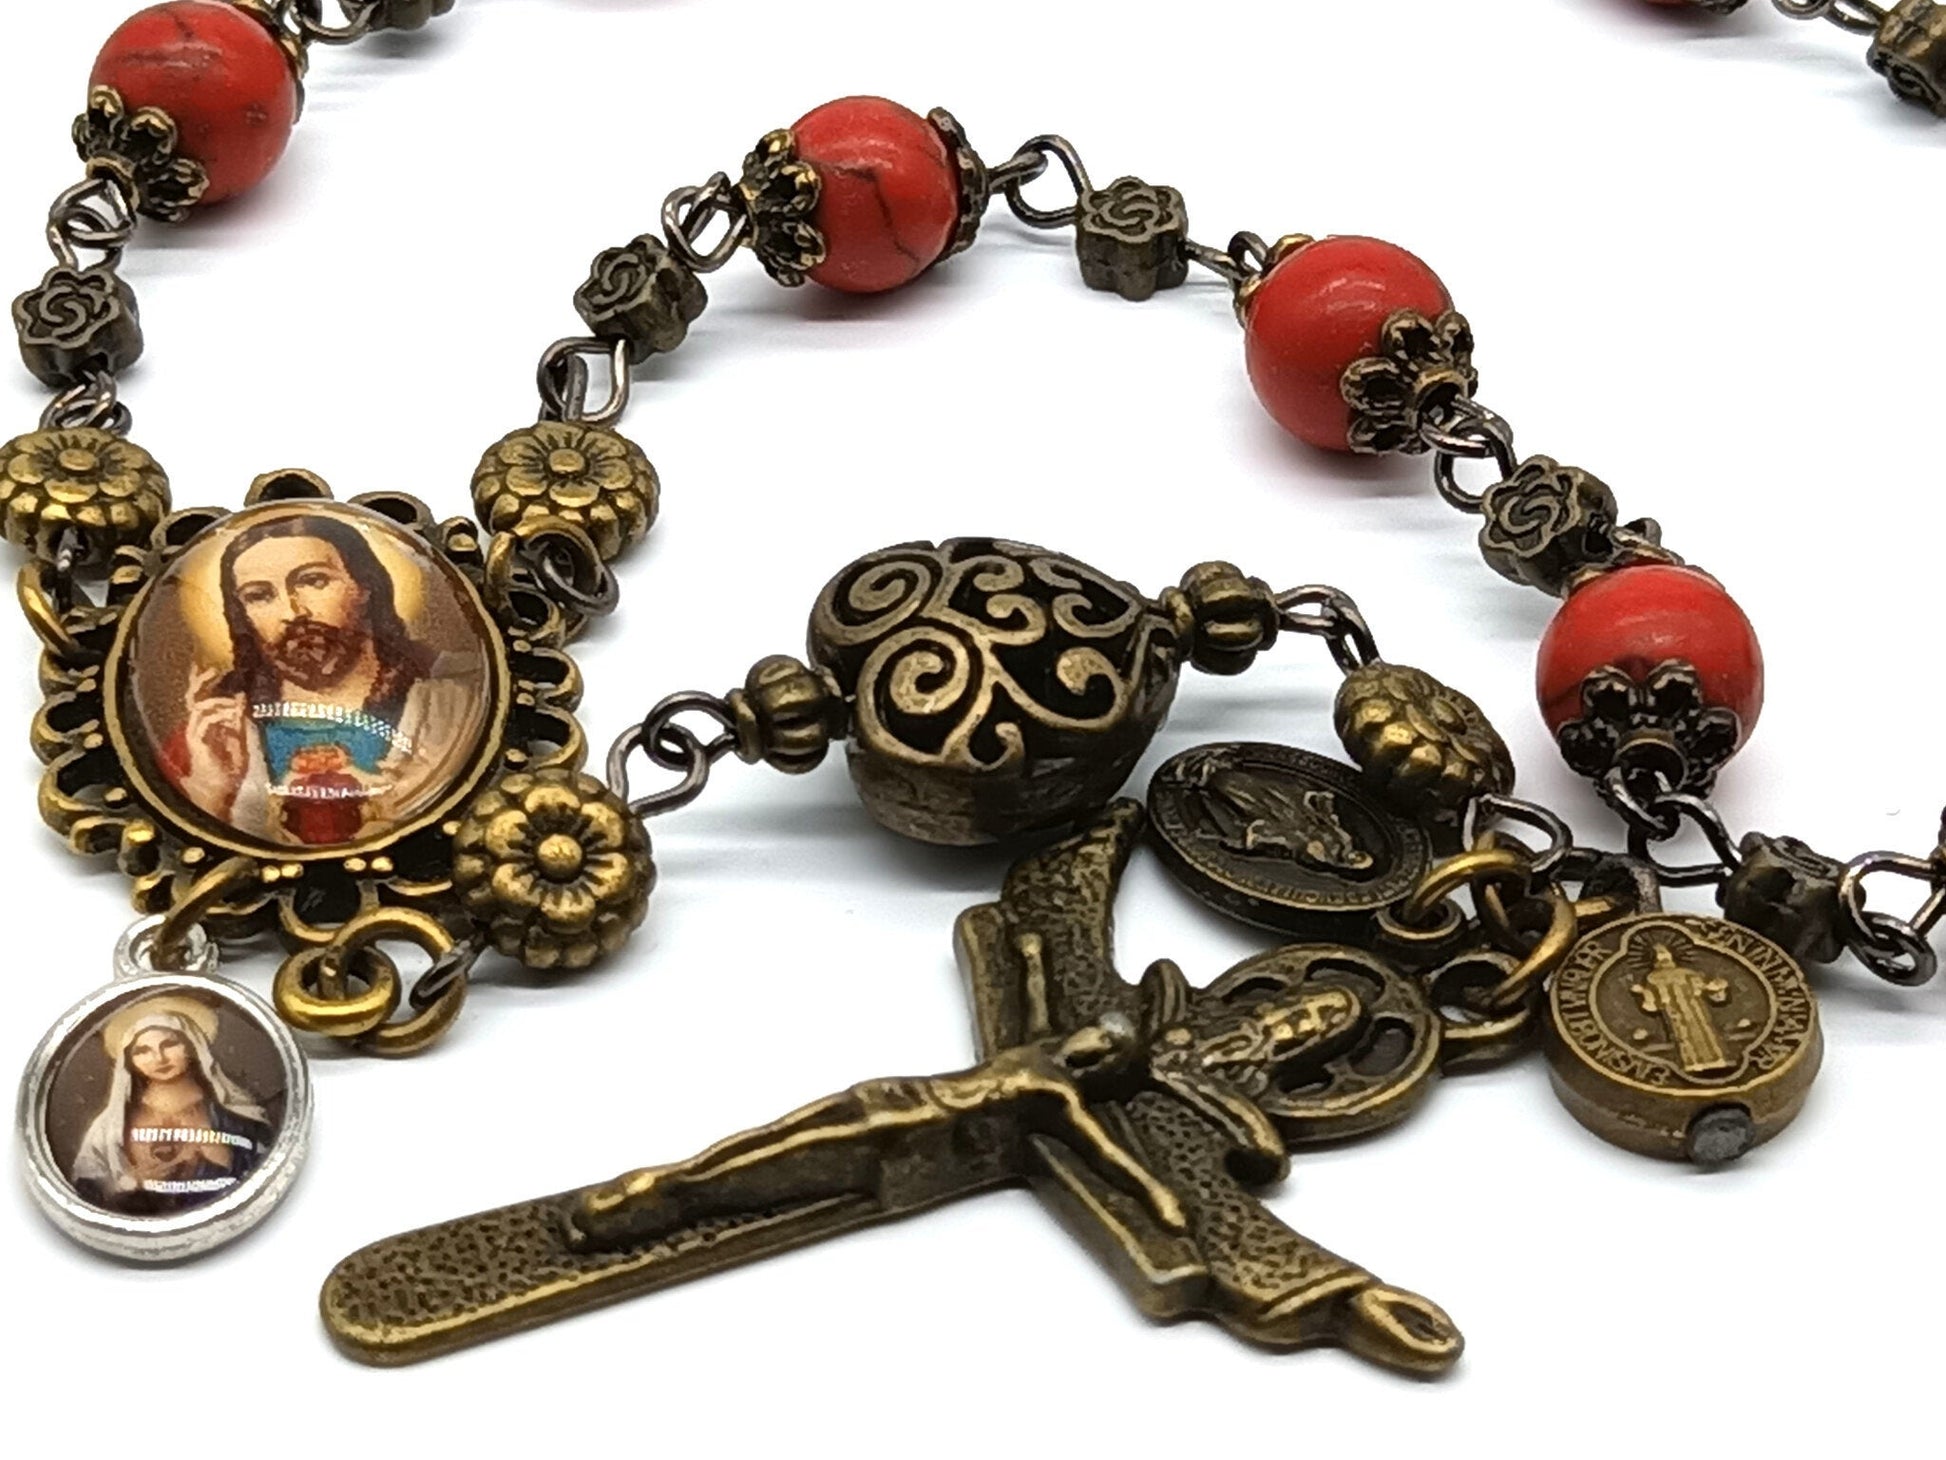 Sacred Heart unique rosary beads single decade with howlite gemstone beads, bronze Holy Trinity crucifix, bead caps and picture centre medal.